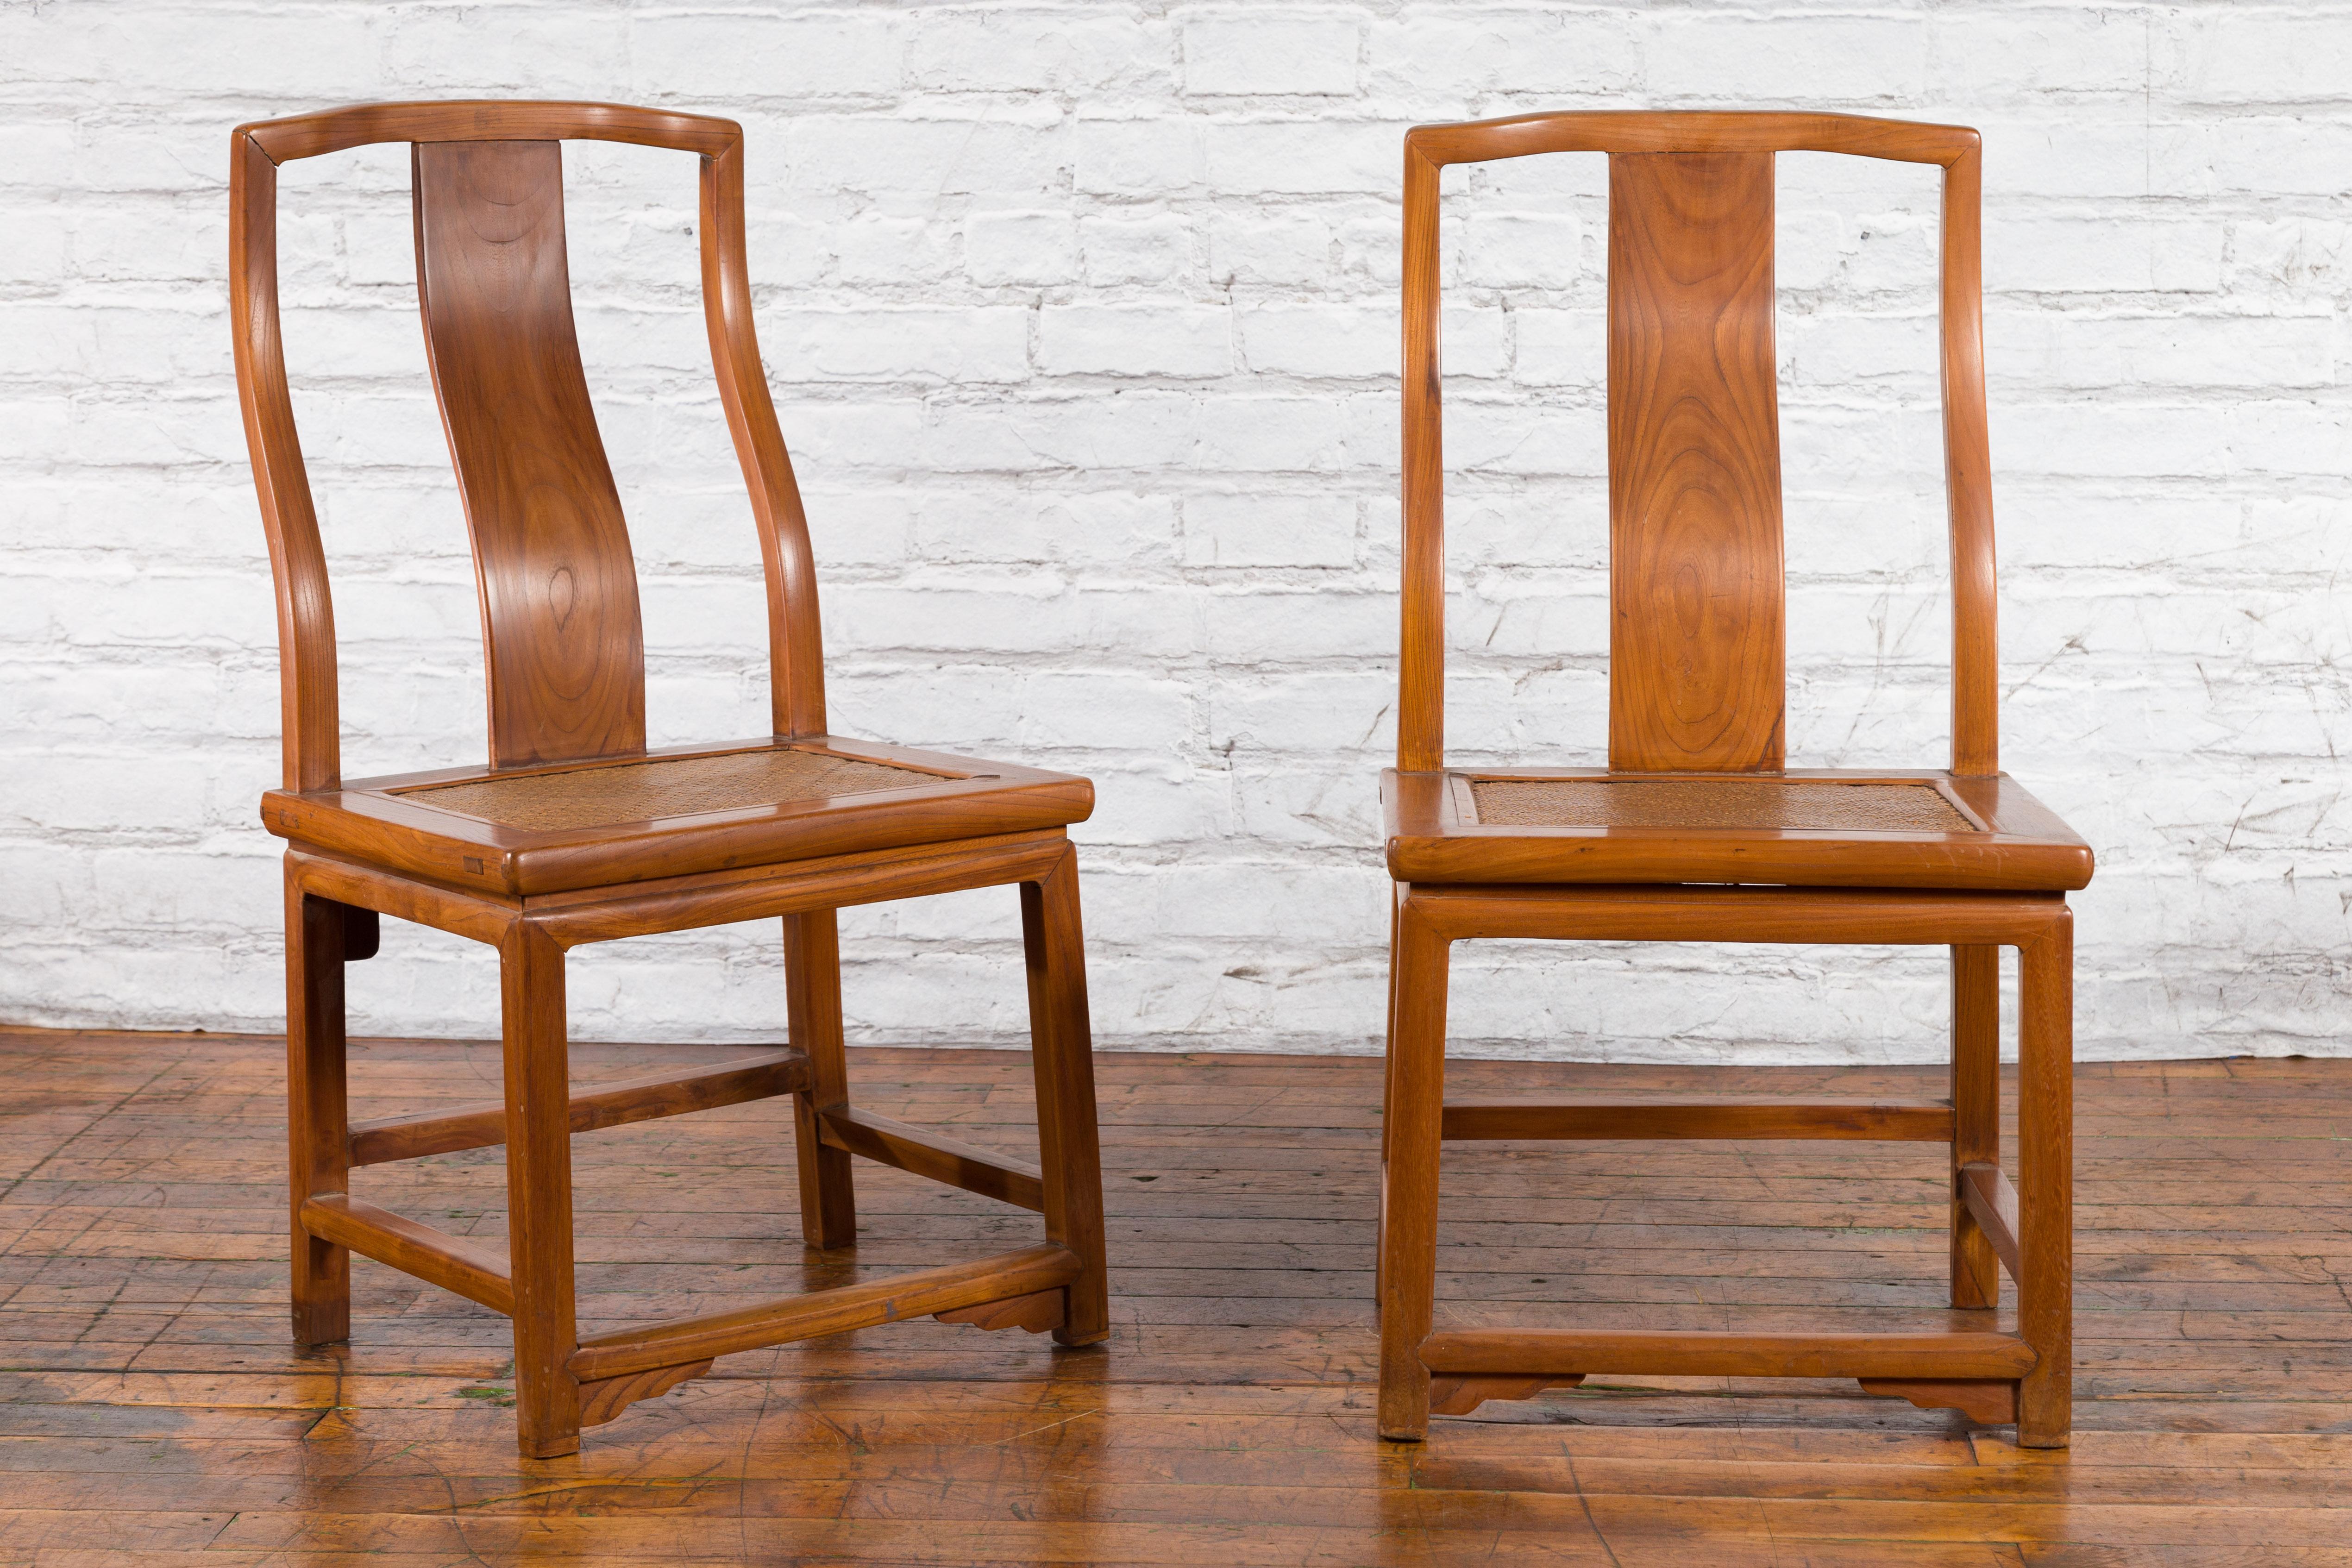 A pair of Chinese Ming dynasty style yoke back side chairs from the early 20th century with woven rattan seats, curving back splats and natural wood patina. Created in China during the early years of the 20th century, each of this pair of side